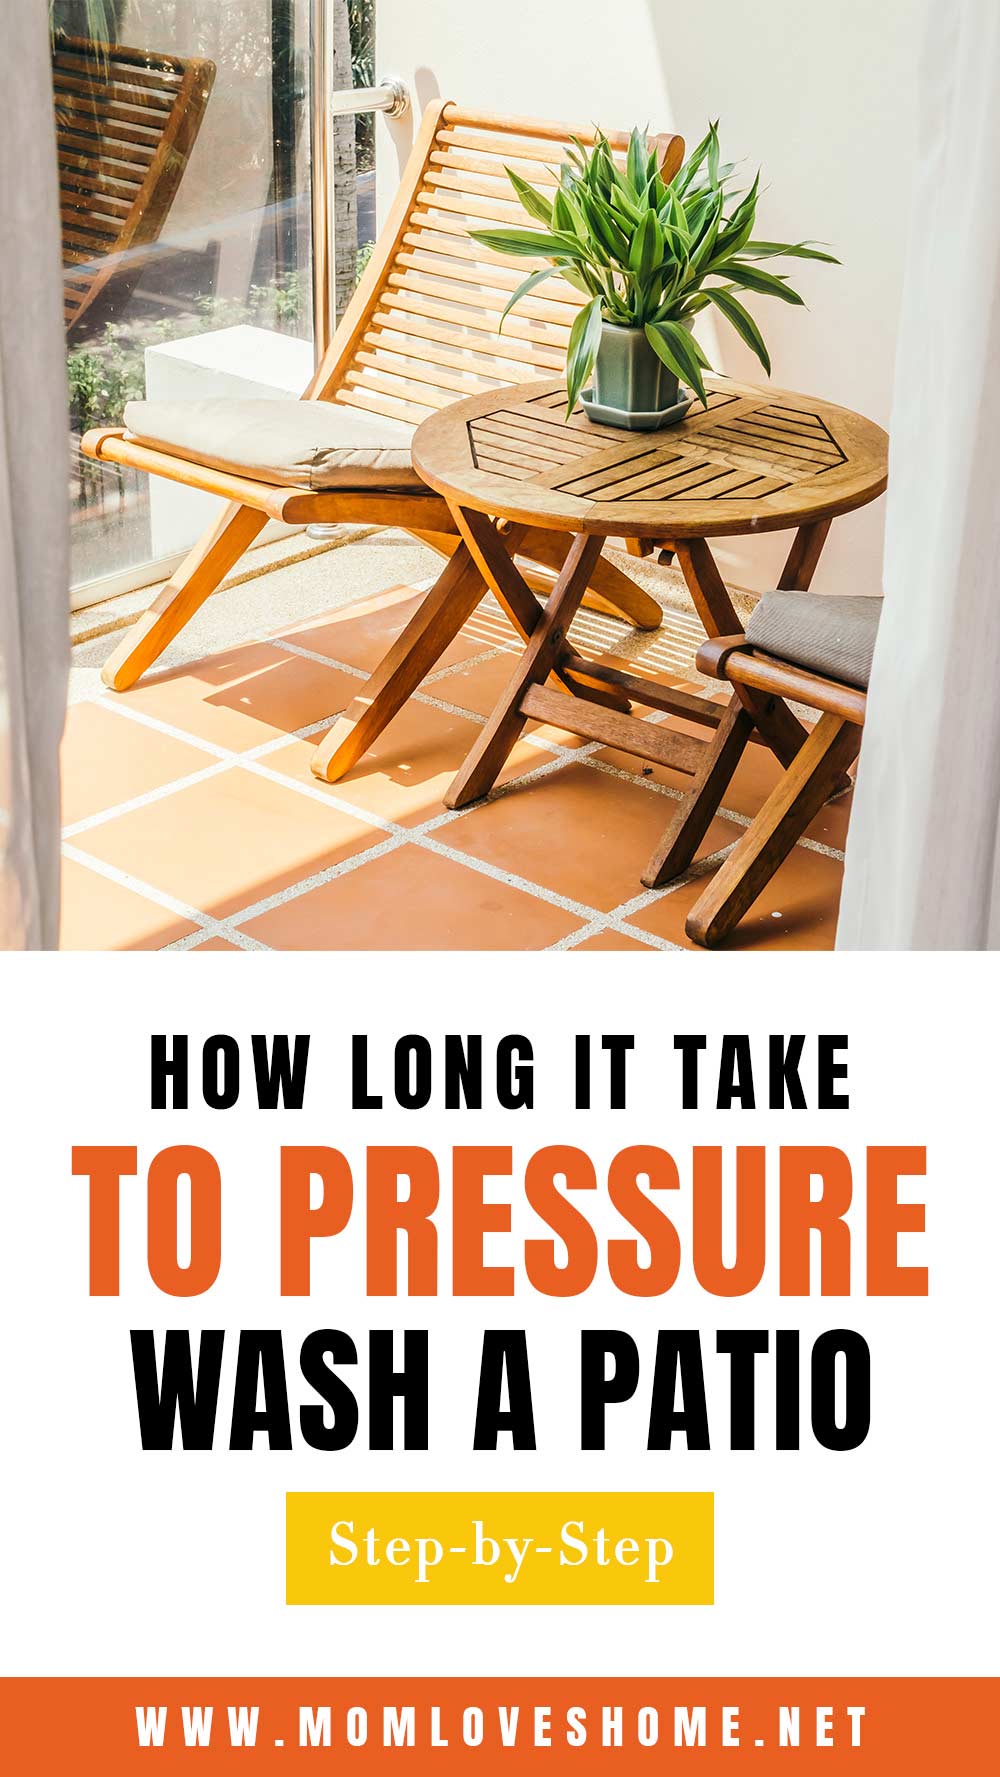 How Long It Takes to Pressure Wash a Patio